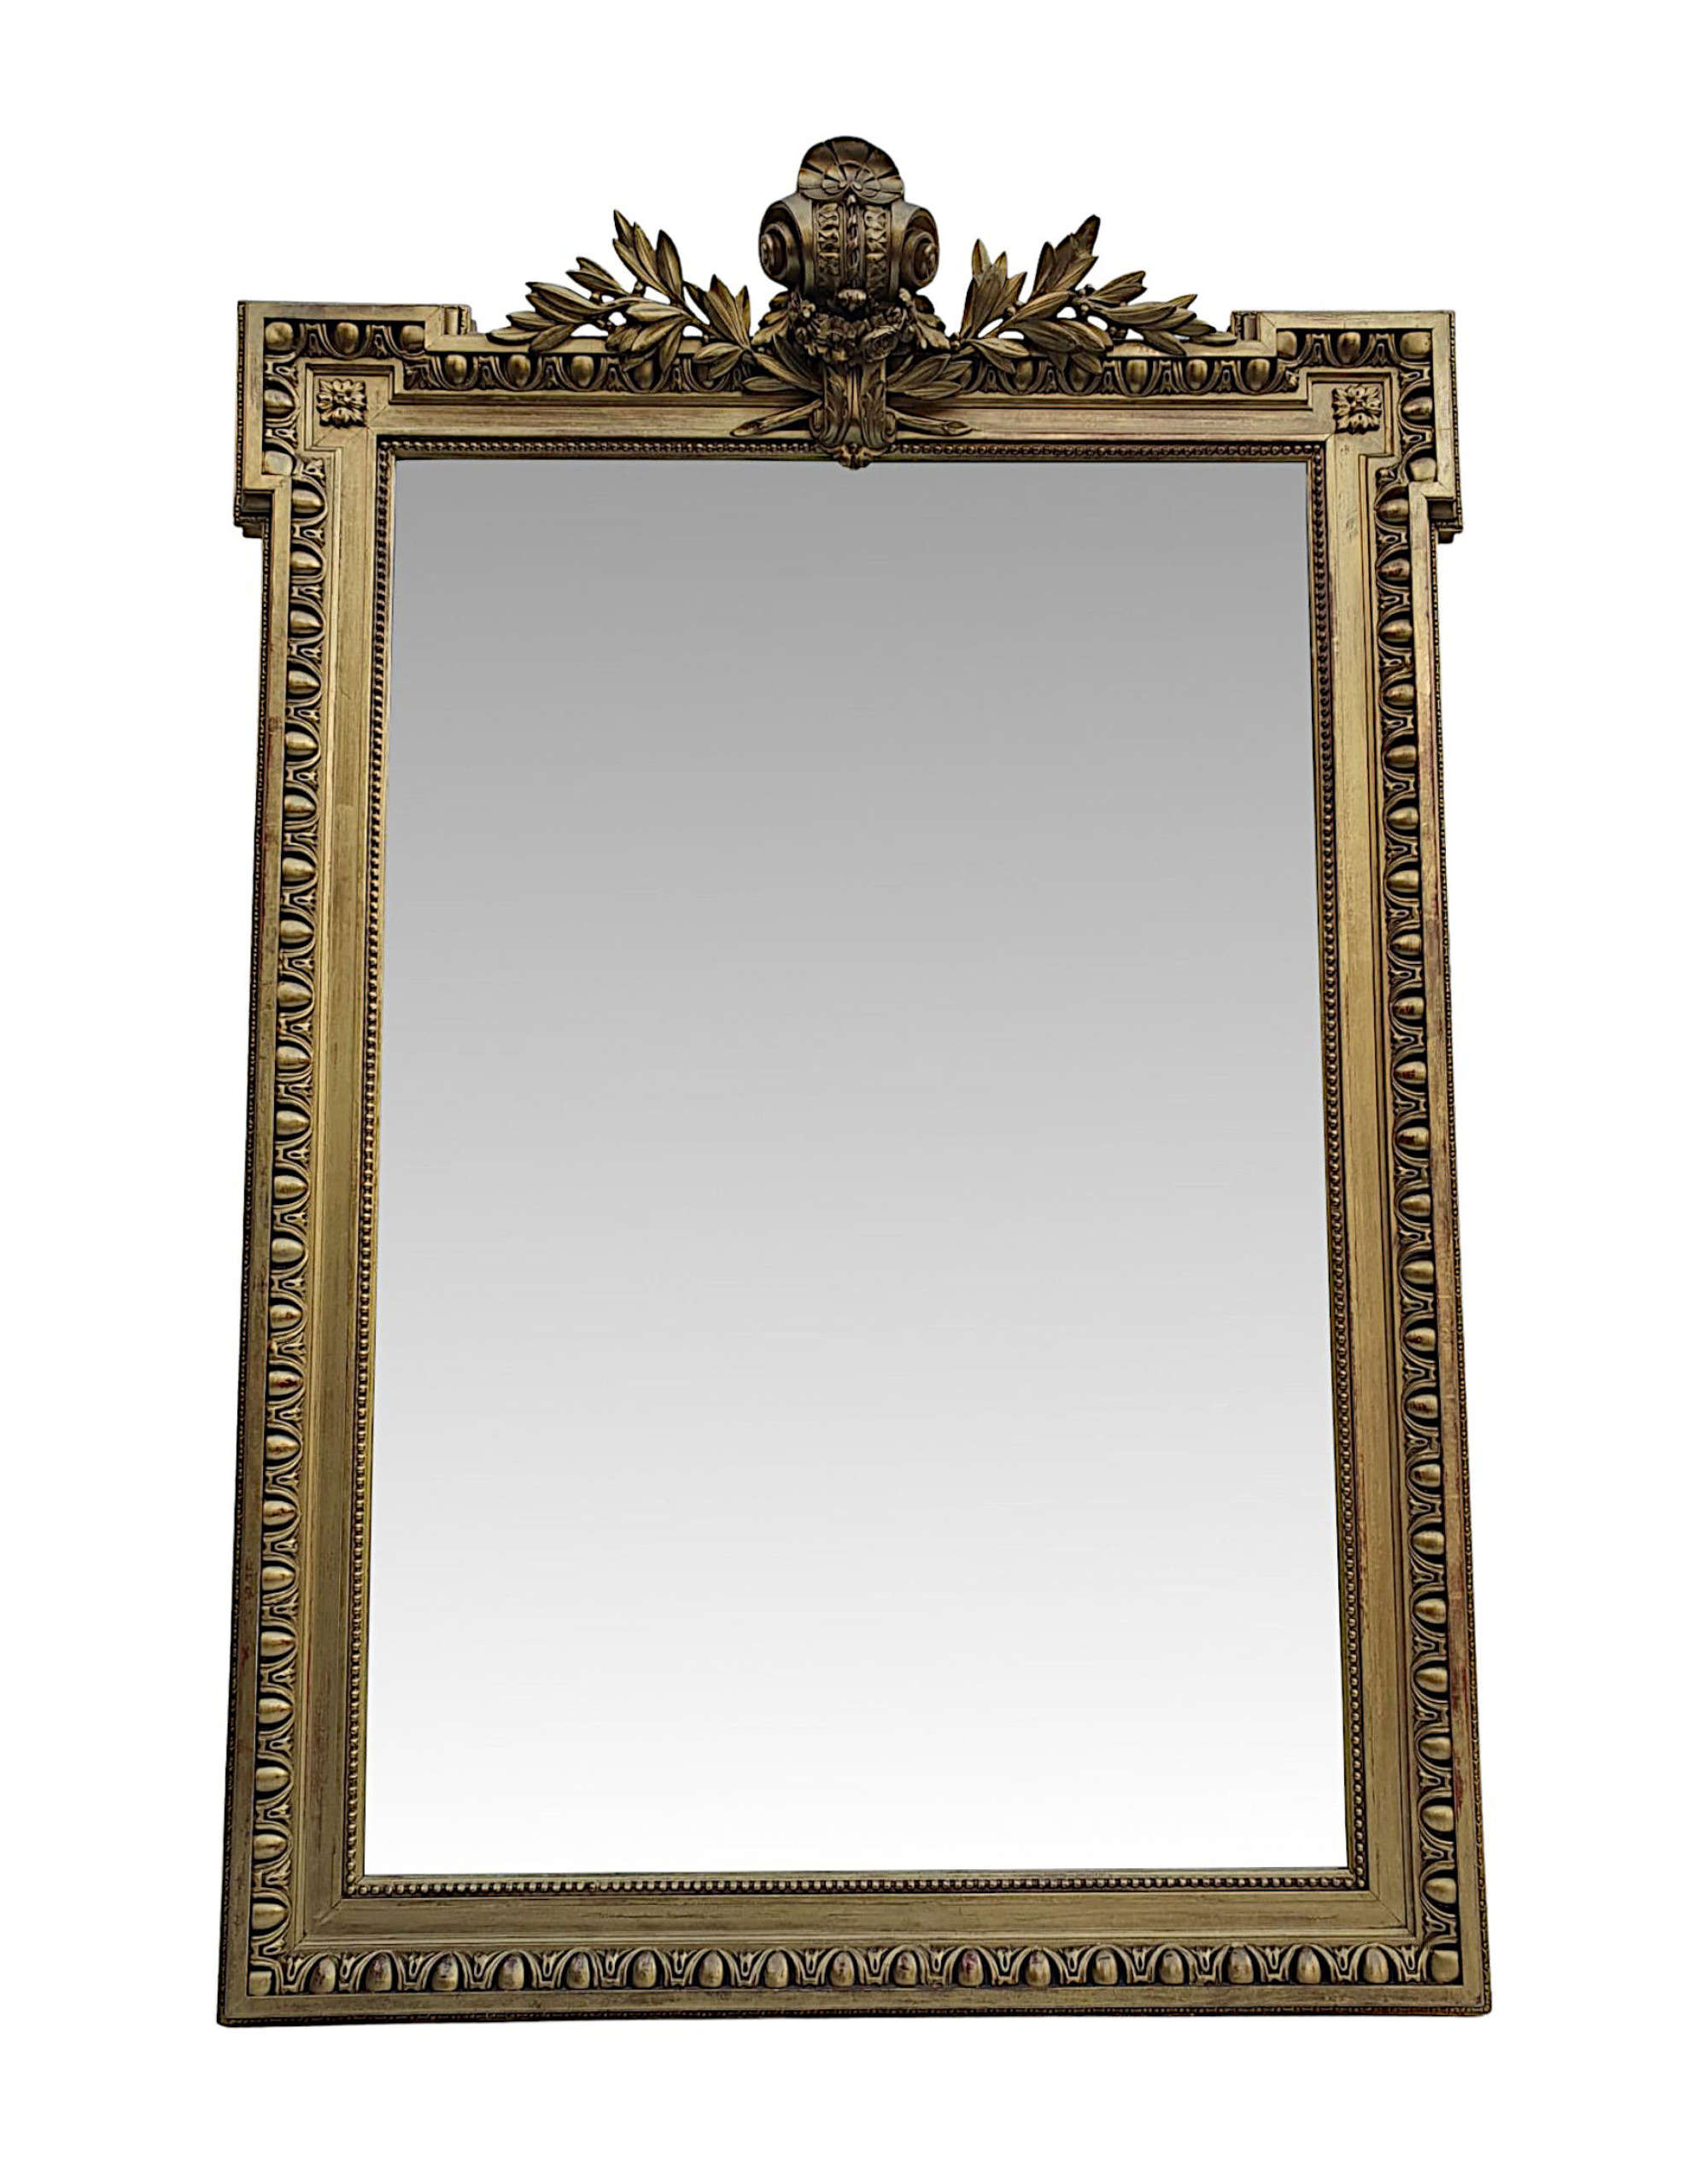 A Fabulous 19th Century Giltwood Hall or Overmantle Mirror